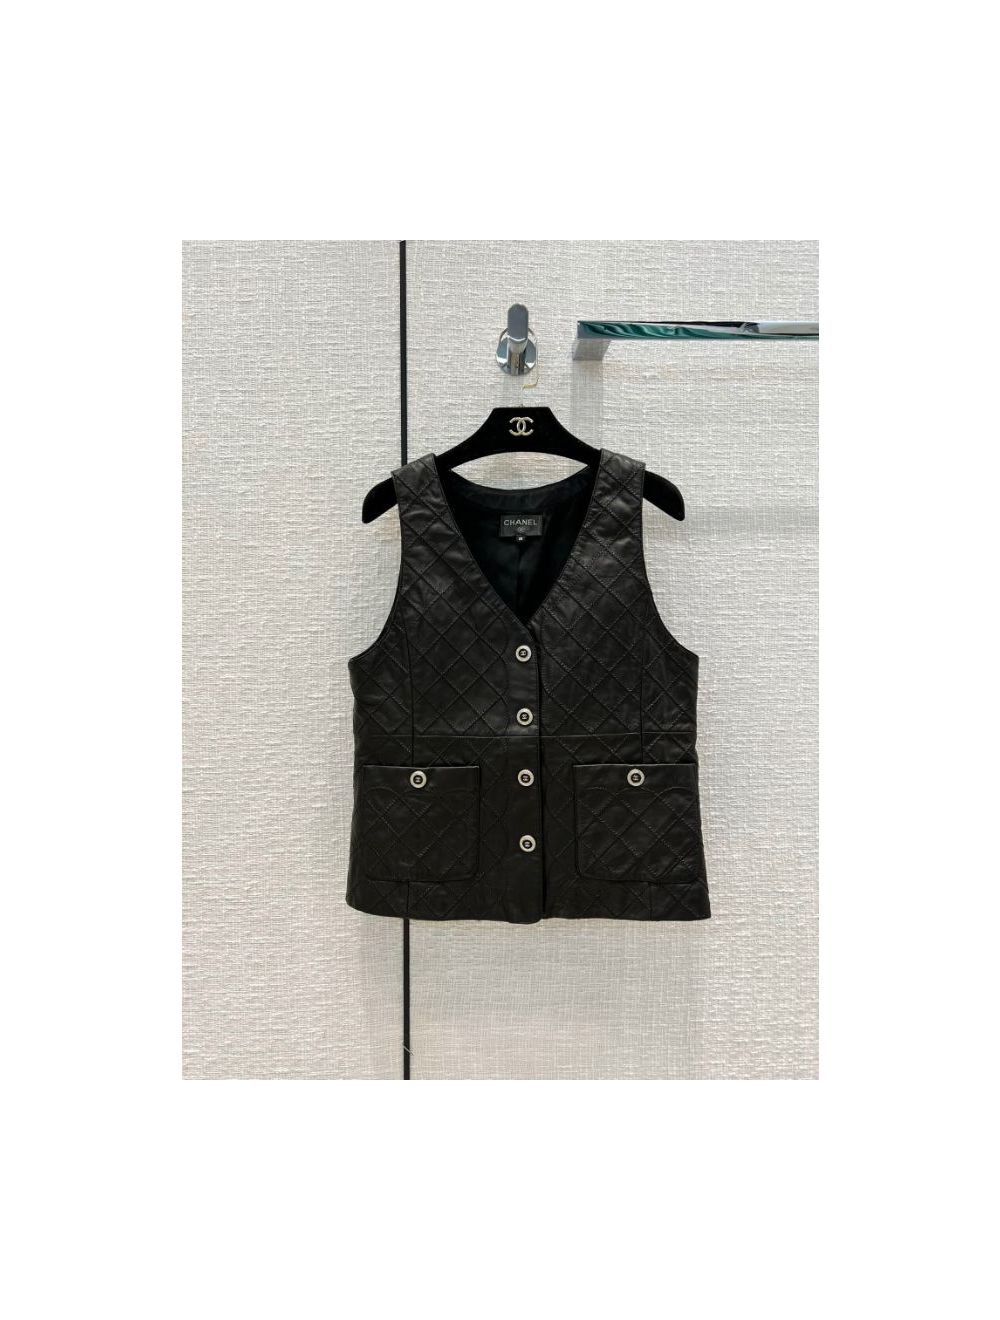 Chanel Leather Vest - Embroidered Lambskin Black Ref. P72652 C64377 94305  ccyg4592042222